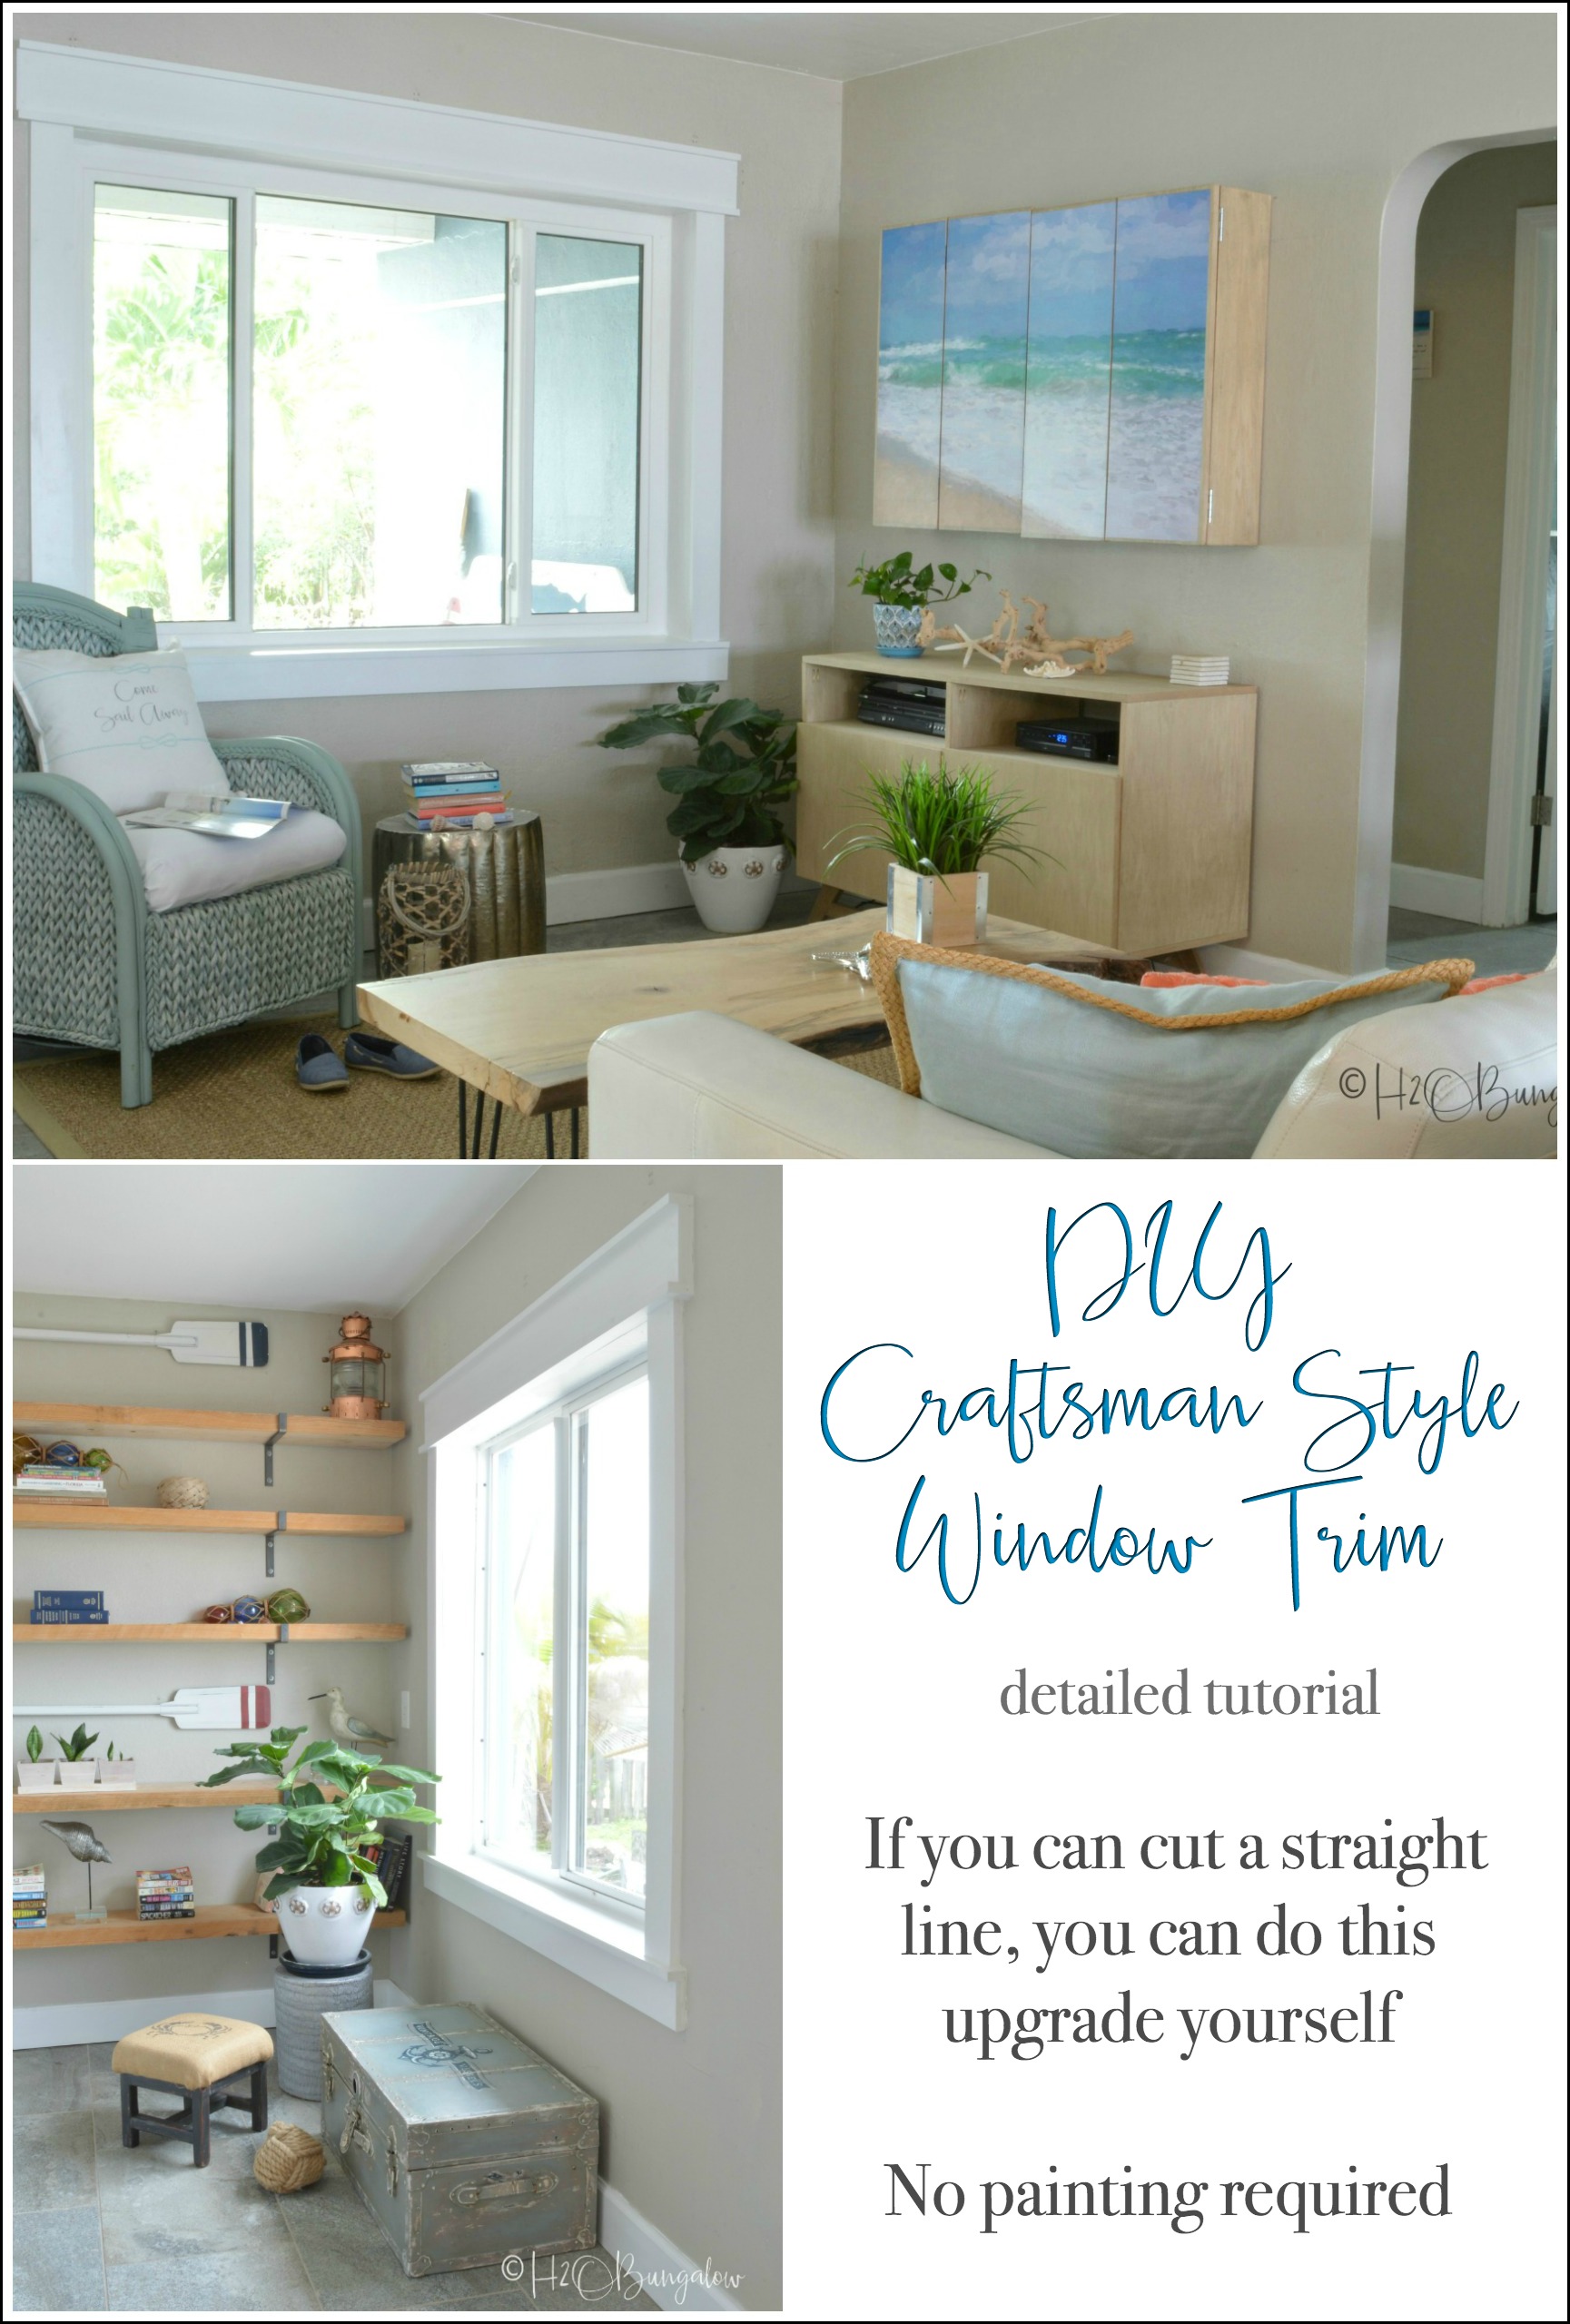 DIY craftsman style window trim tutorial for newbies. If you can cut a straight line, you can build window casings! No fancy cuts in this step by step guide to build craftsman style window casing trim. Use Finished Elegance prefinished boards and you don't need to paint! Includes time saving tips for installing window trim